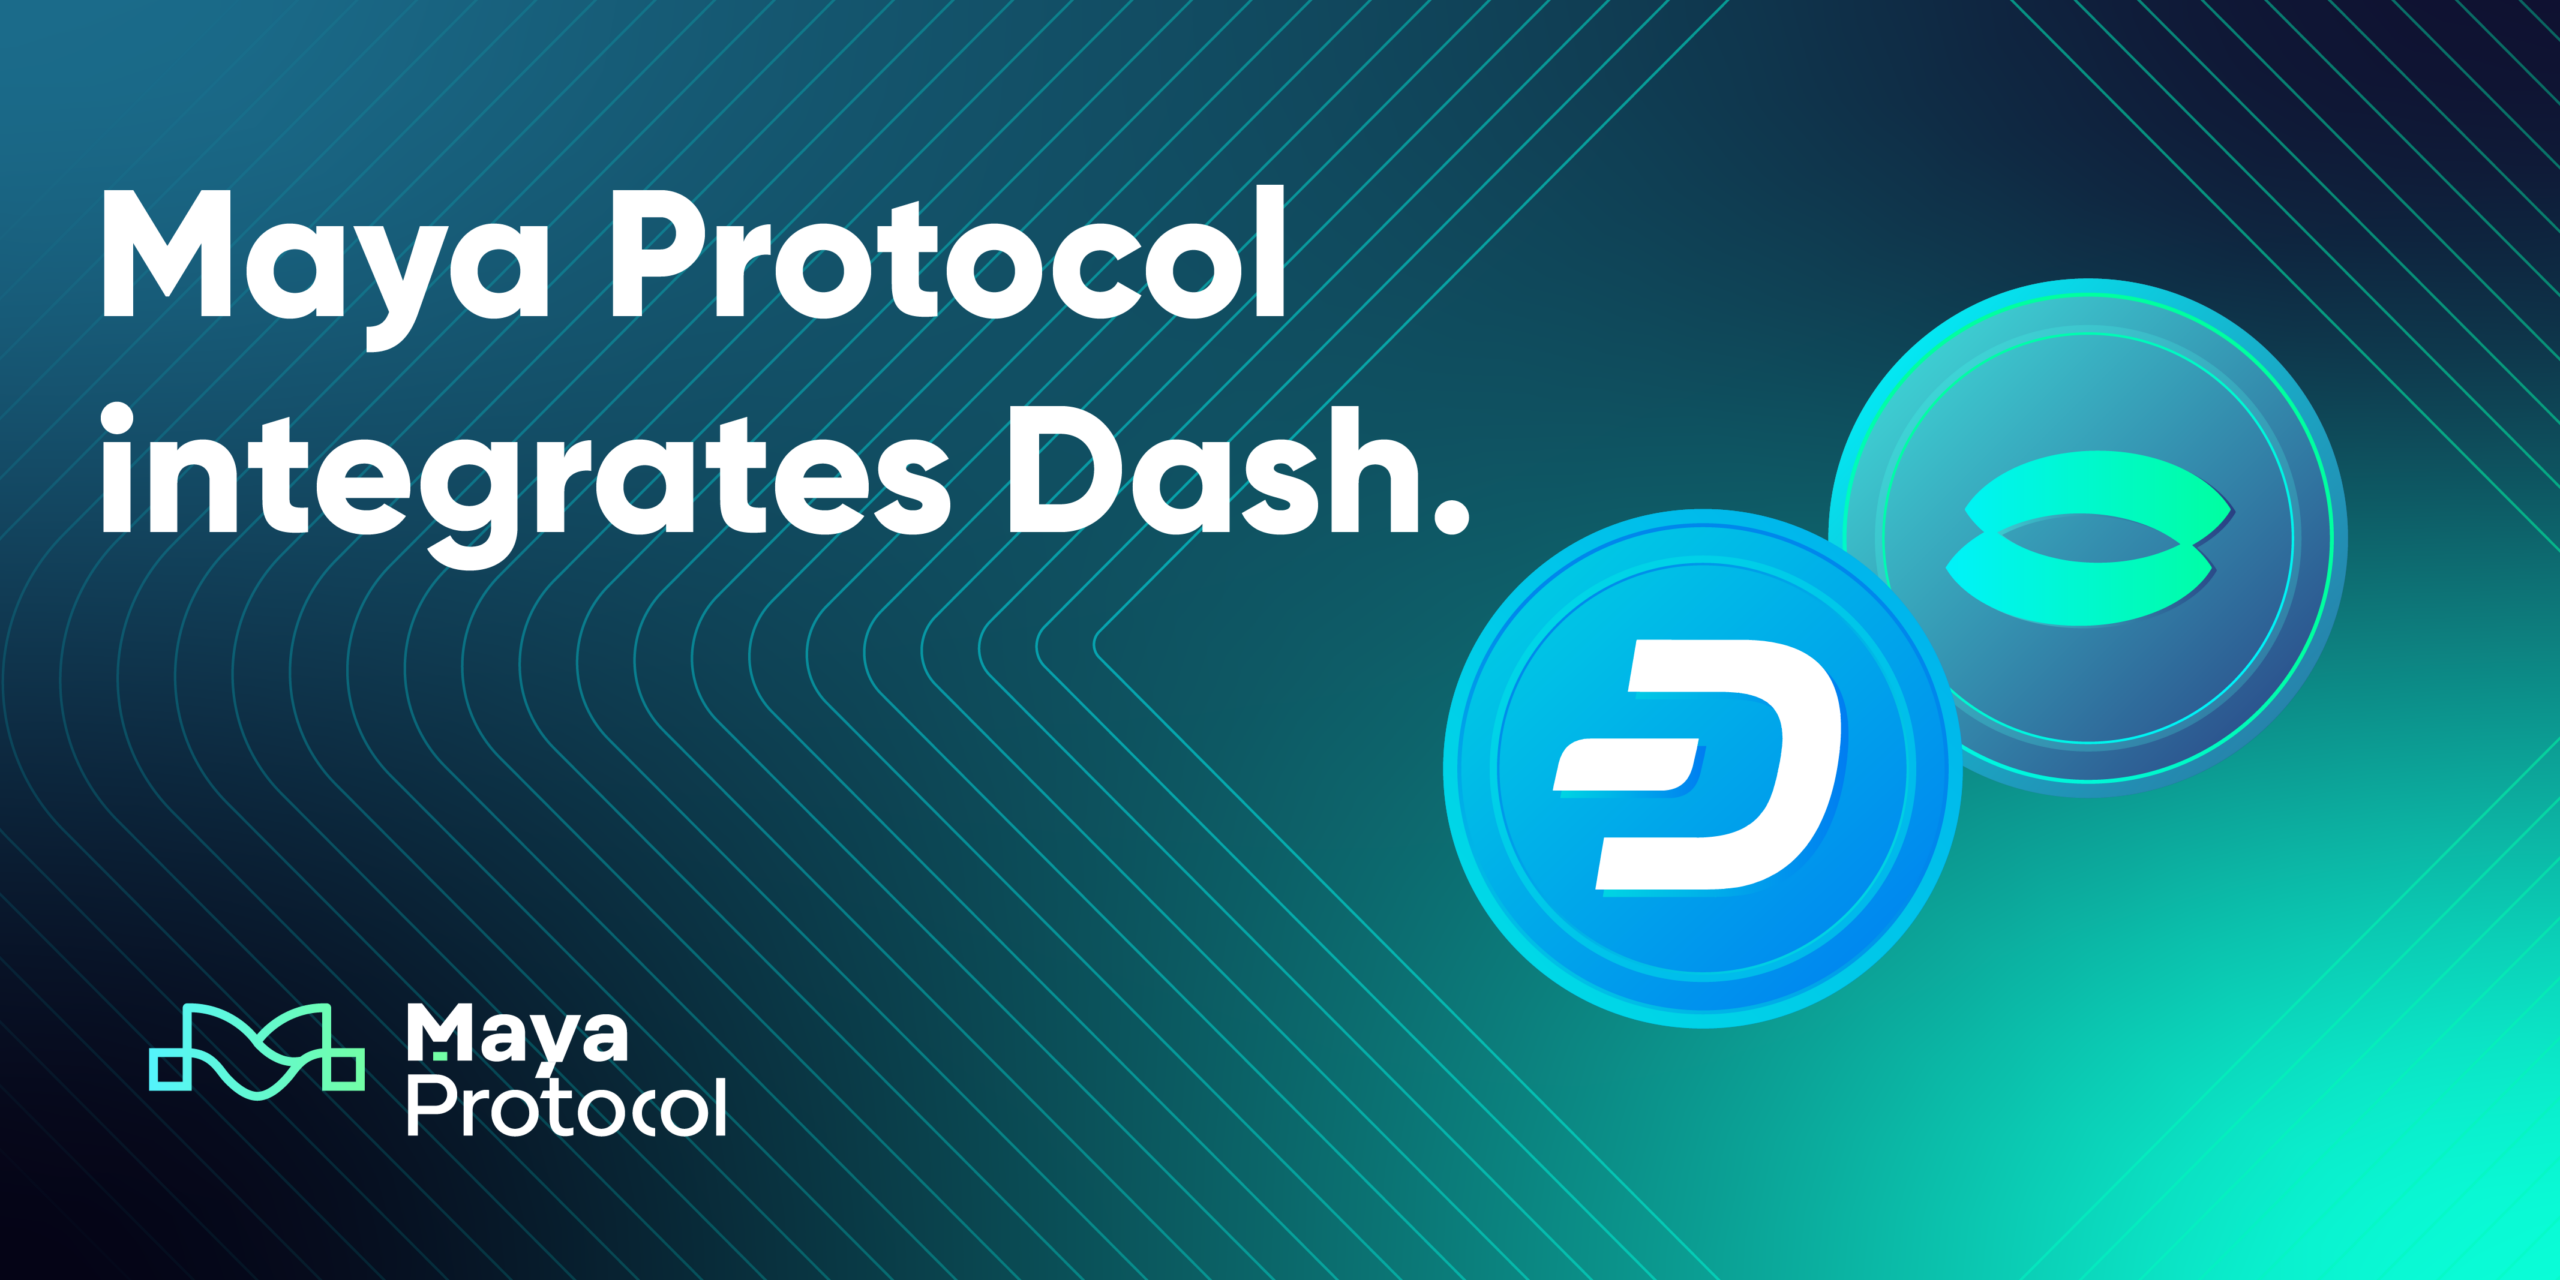 Dash and Maya Protocol Unite to Power the Future of Decentralized Finance